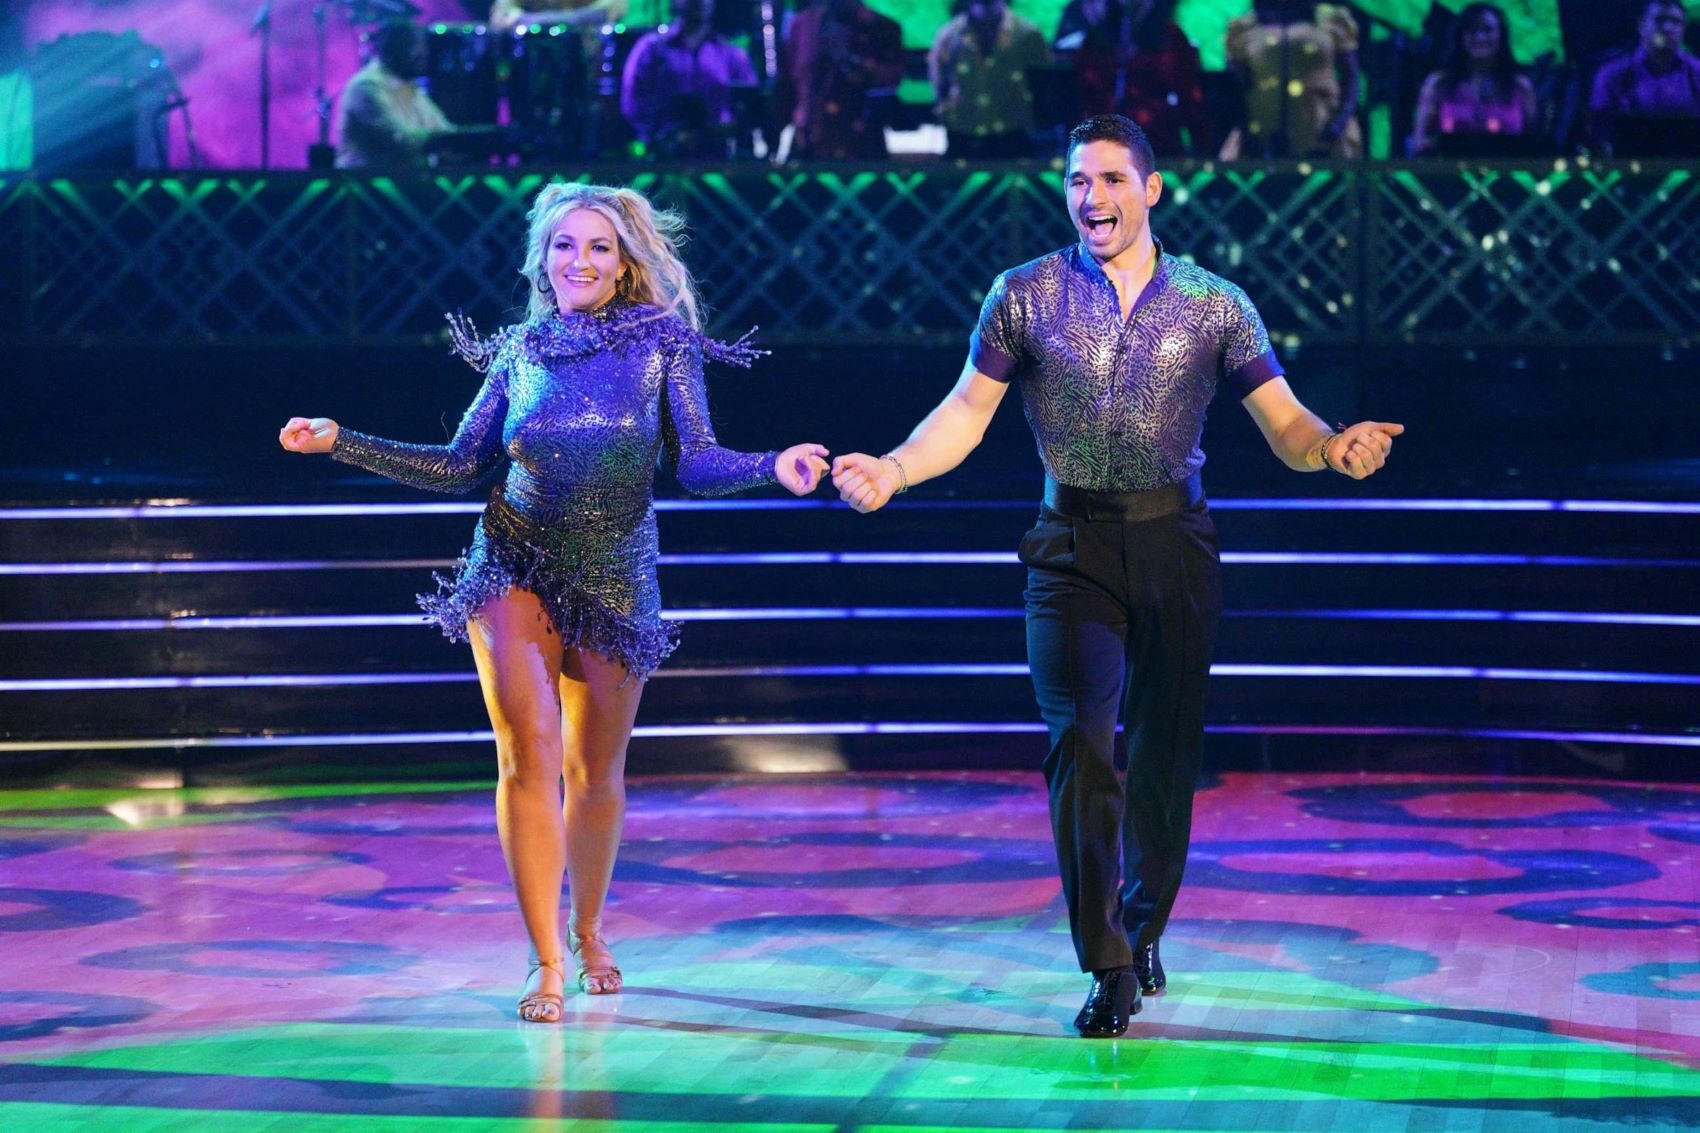 jamie-lynn-spears-gets-eliminated-from-dancing-with-the-stars-in-week-2